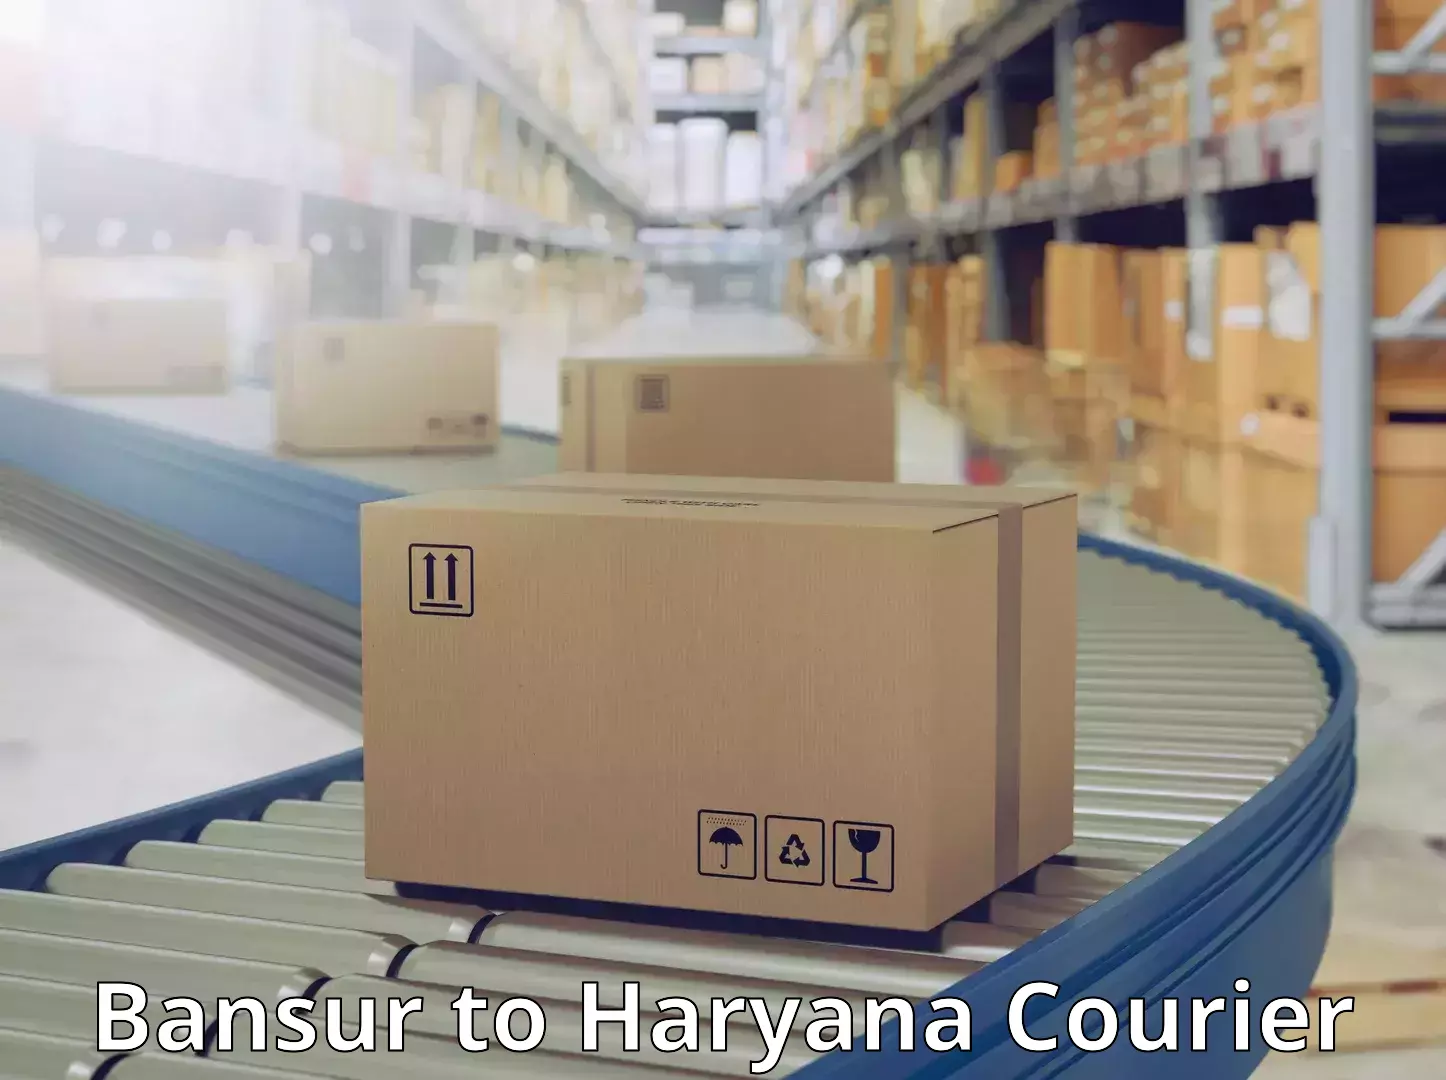 State-of-the-art courier technology Bansur to Haryana